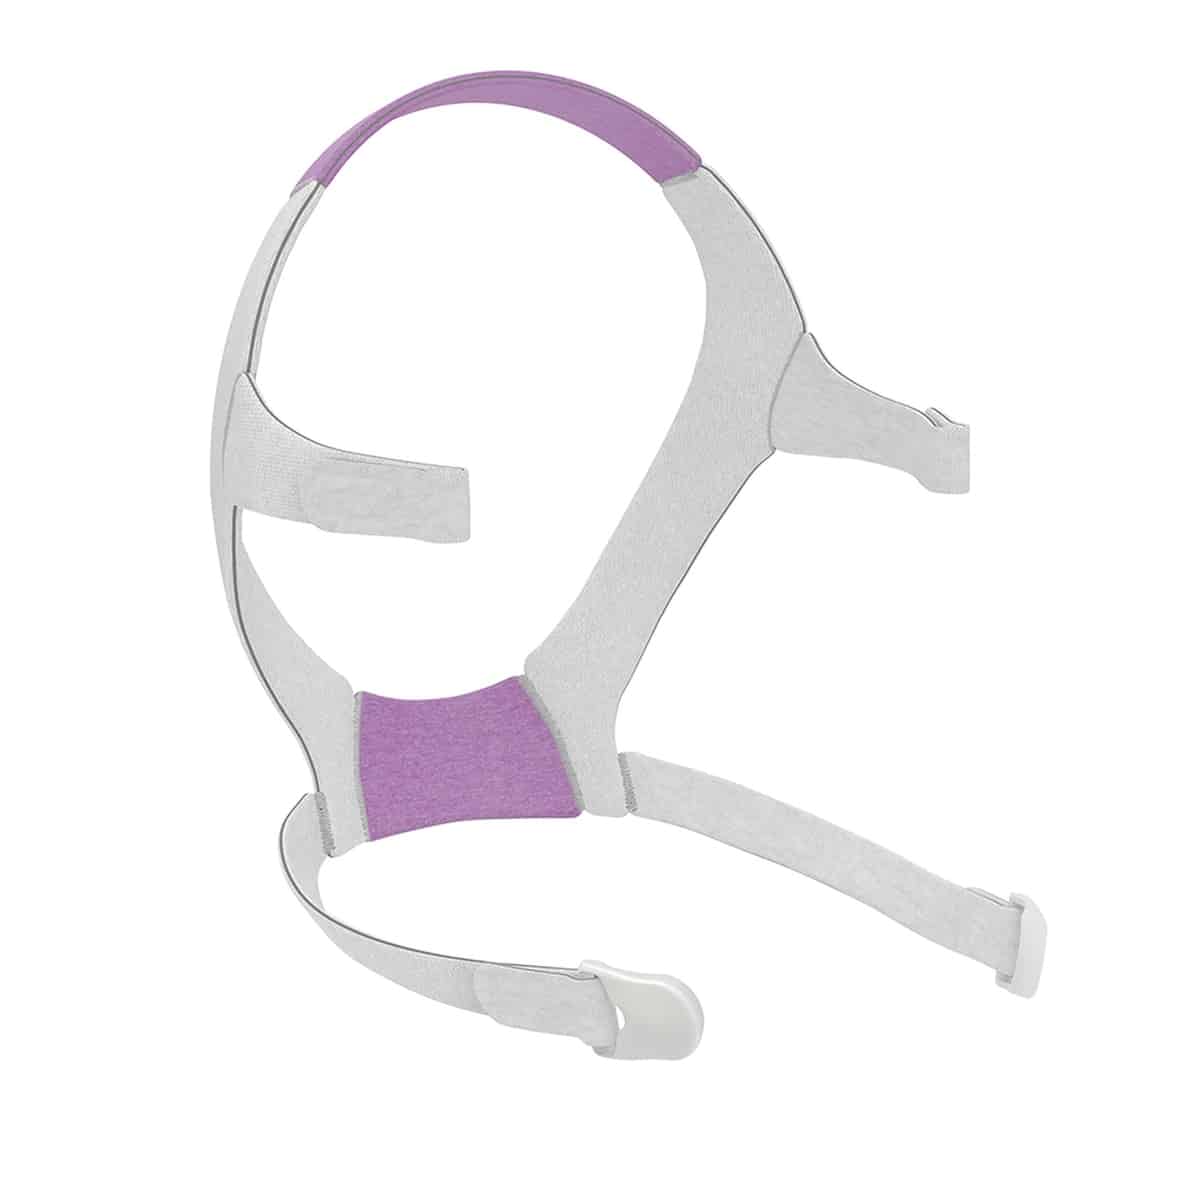 Featured image for “ResMed AirFit F20 For Her Headgear”